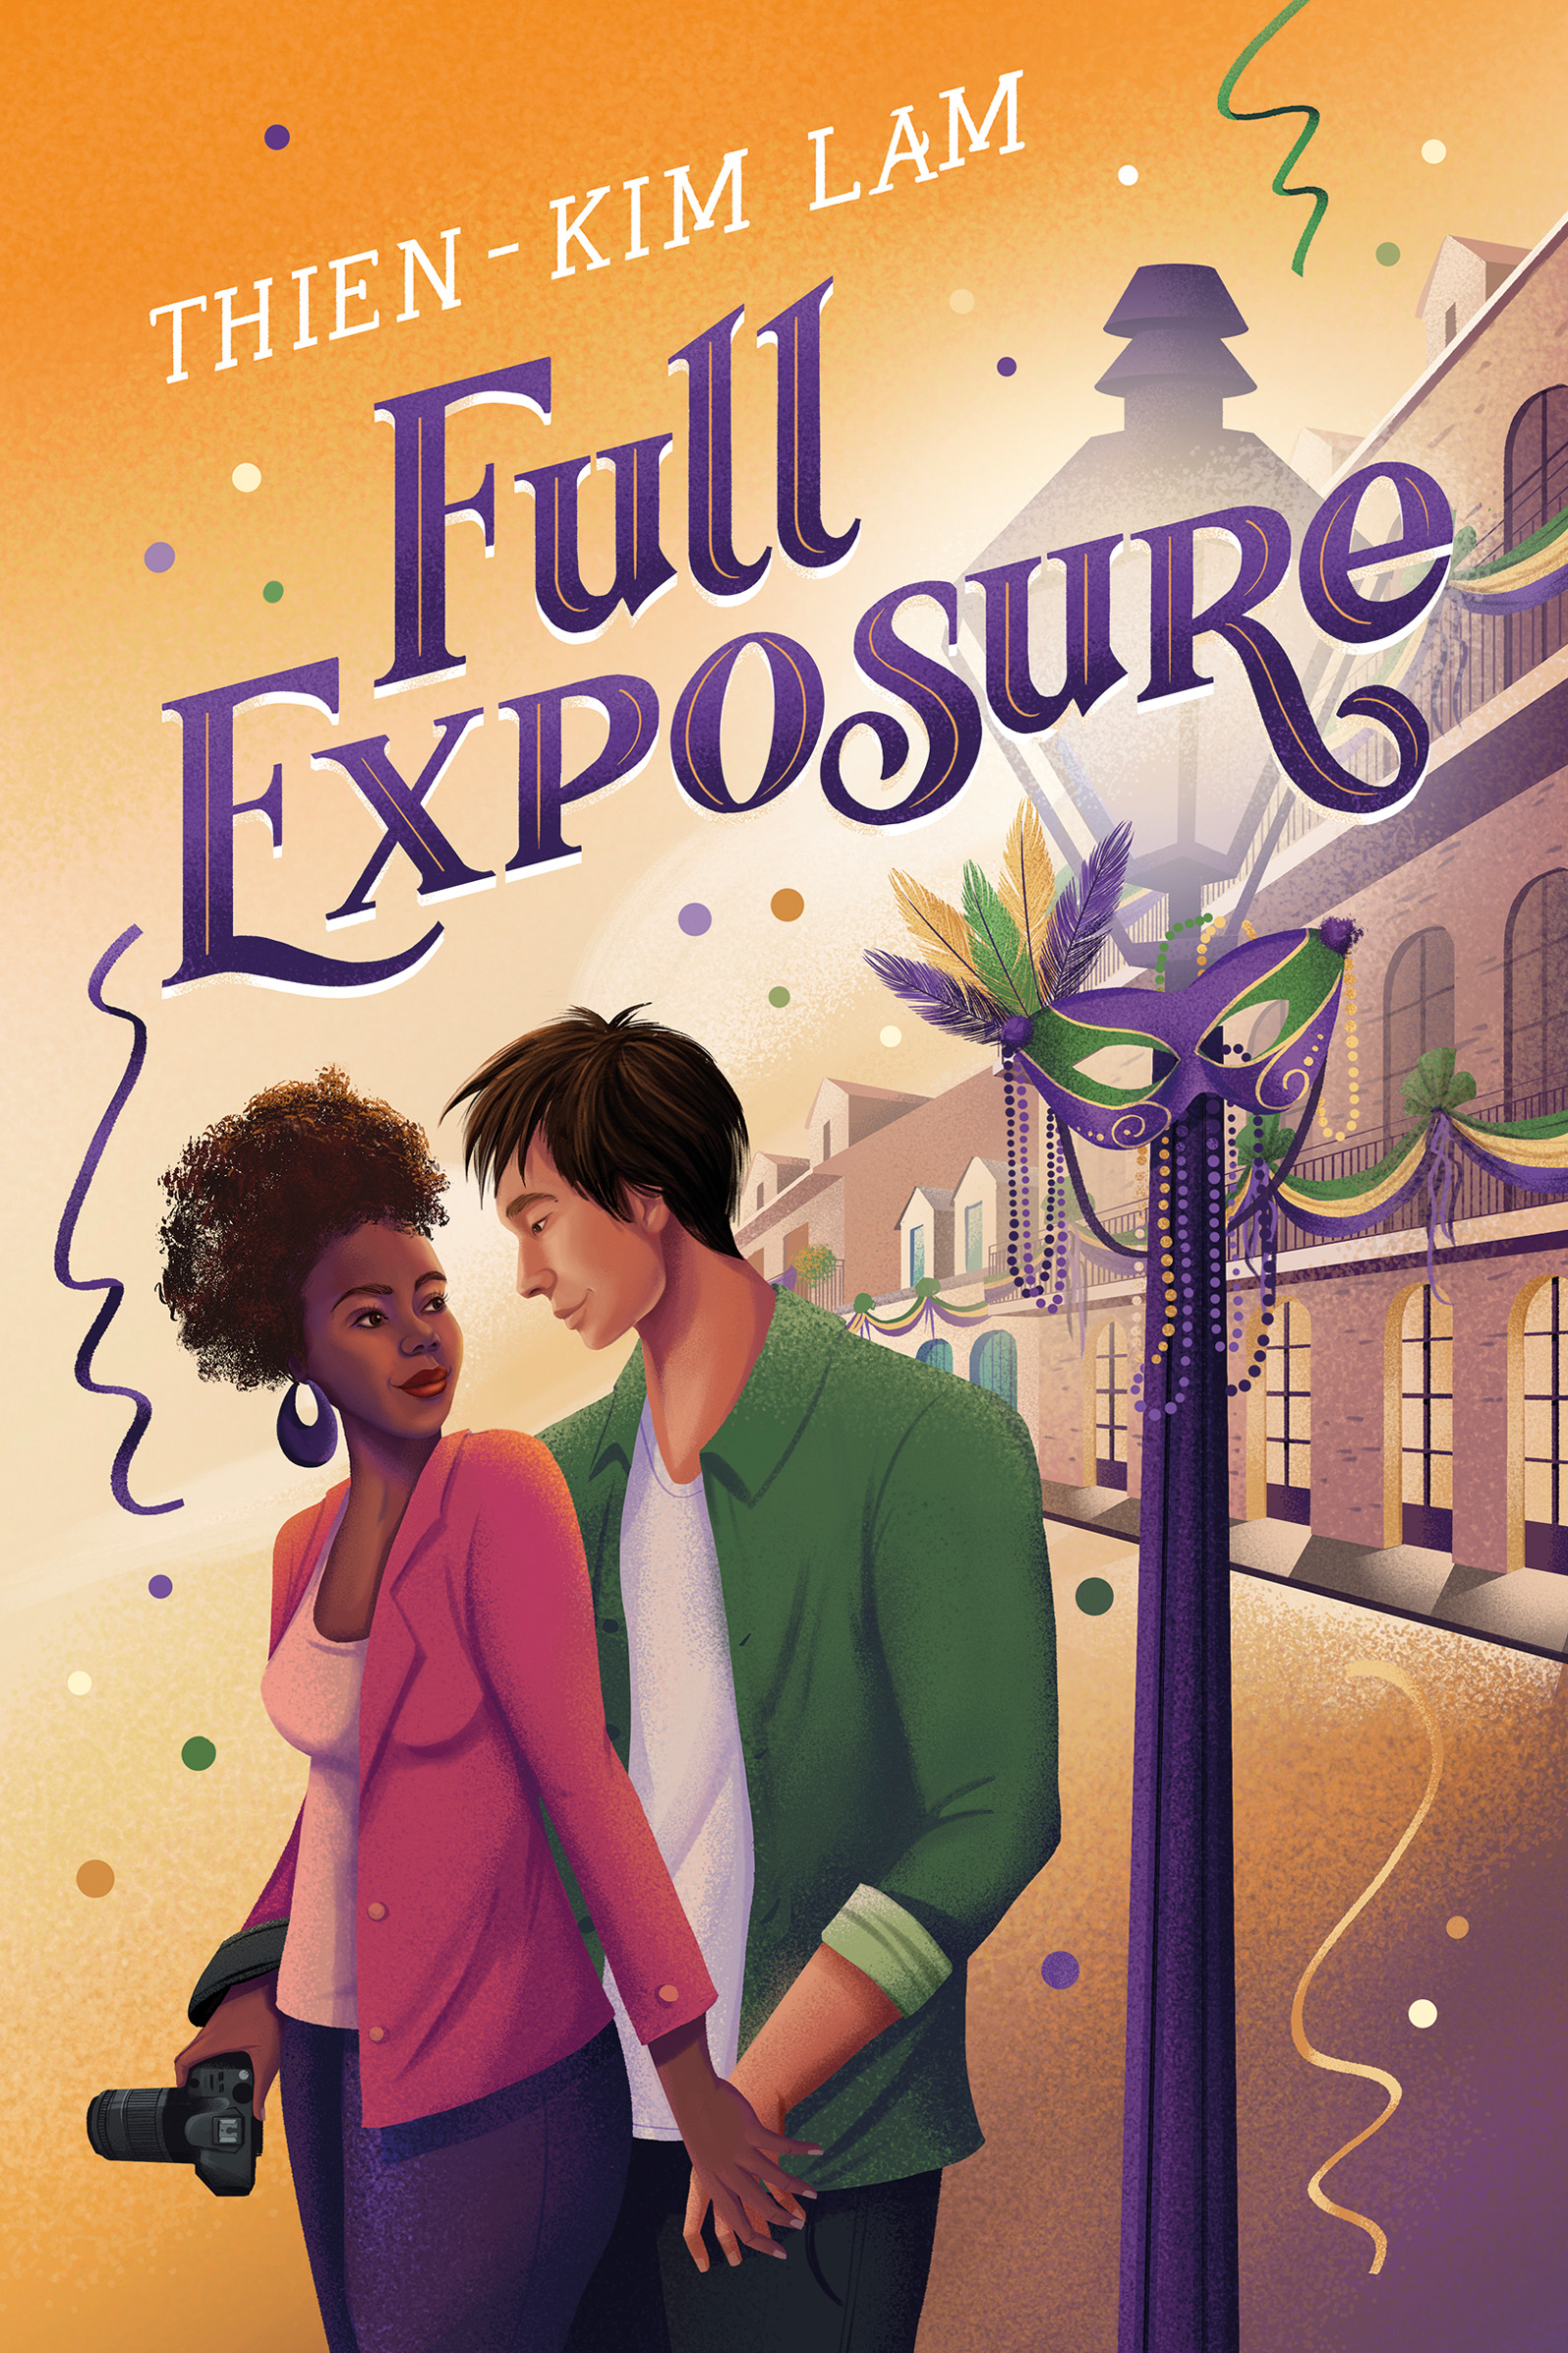 Full Exposure (Boss Babes #2) by Thien-Kim